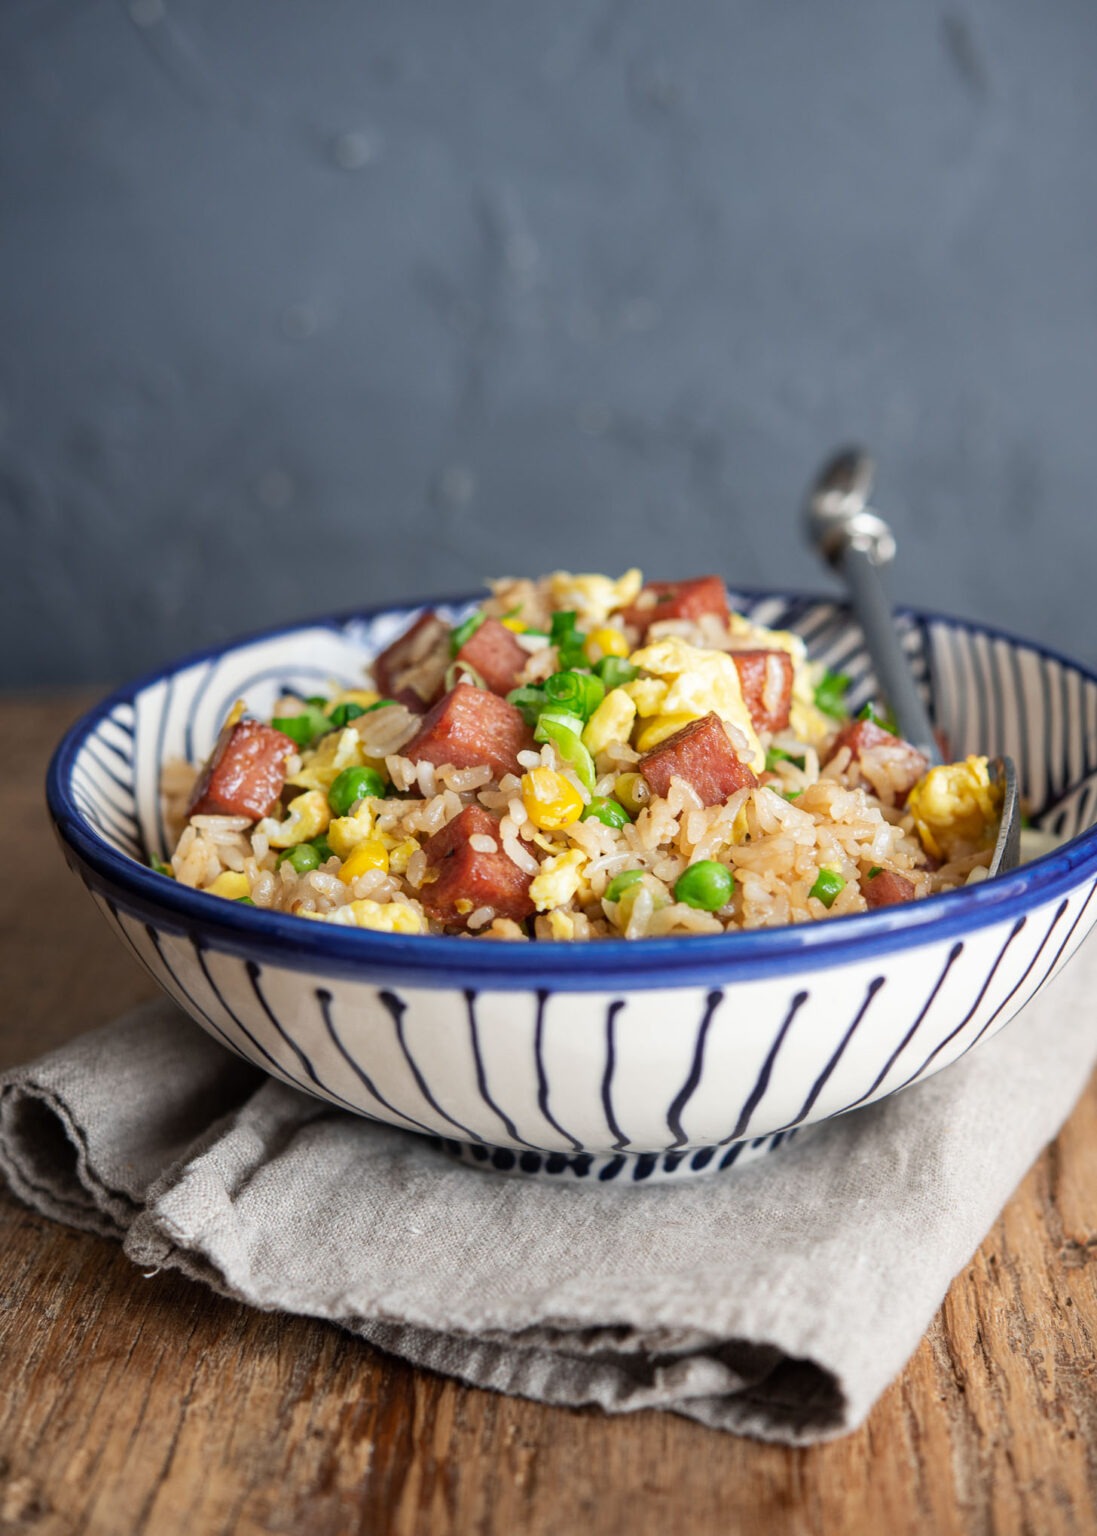 Quick Spam Fried Rice - Beyond Kimchee